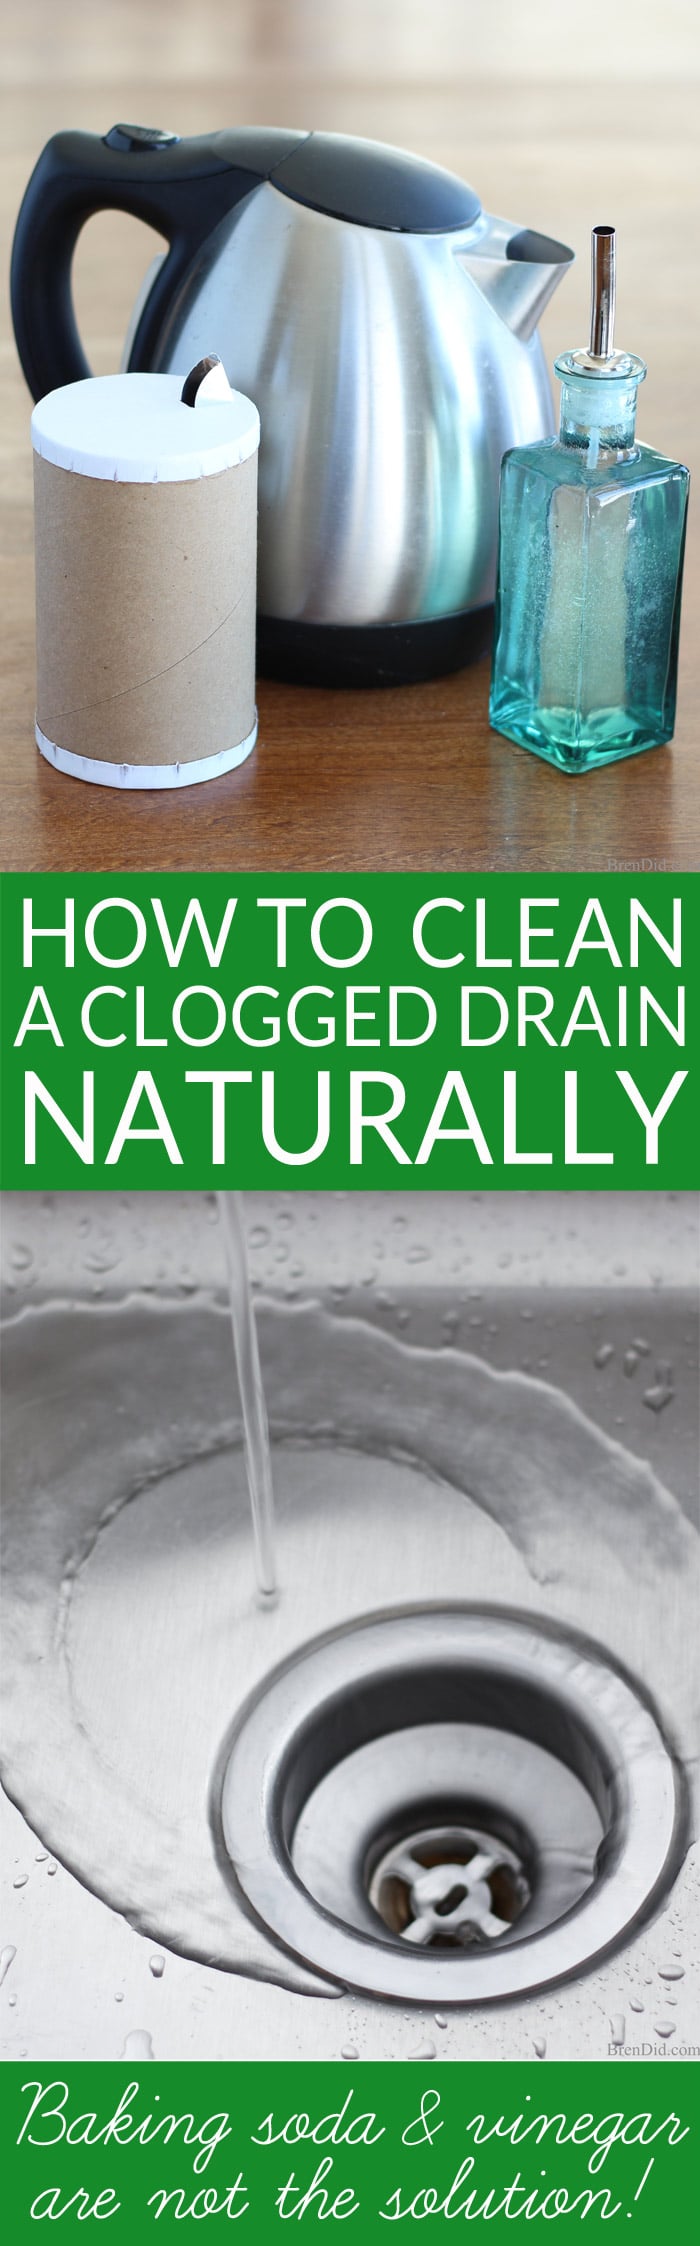 How to Naturally Clean a Clogged Drain